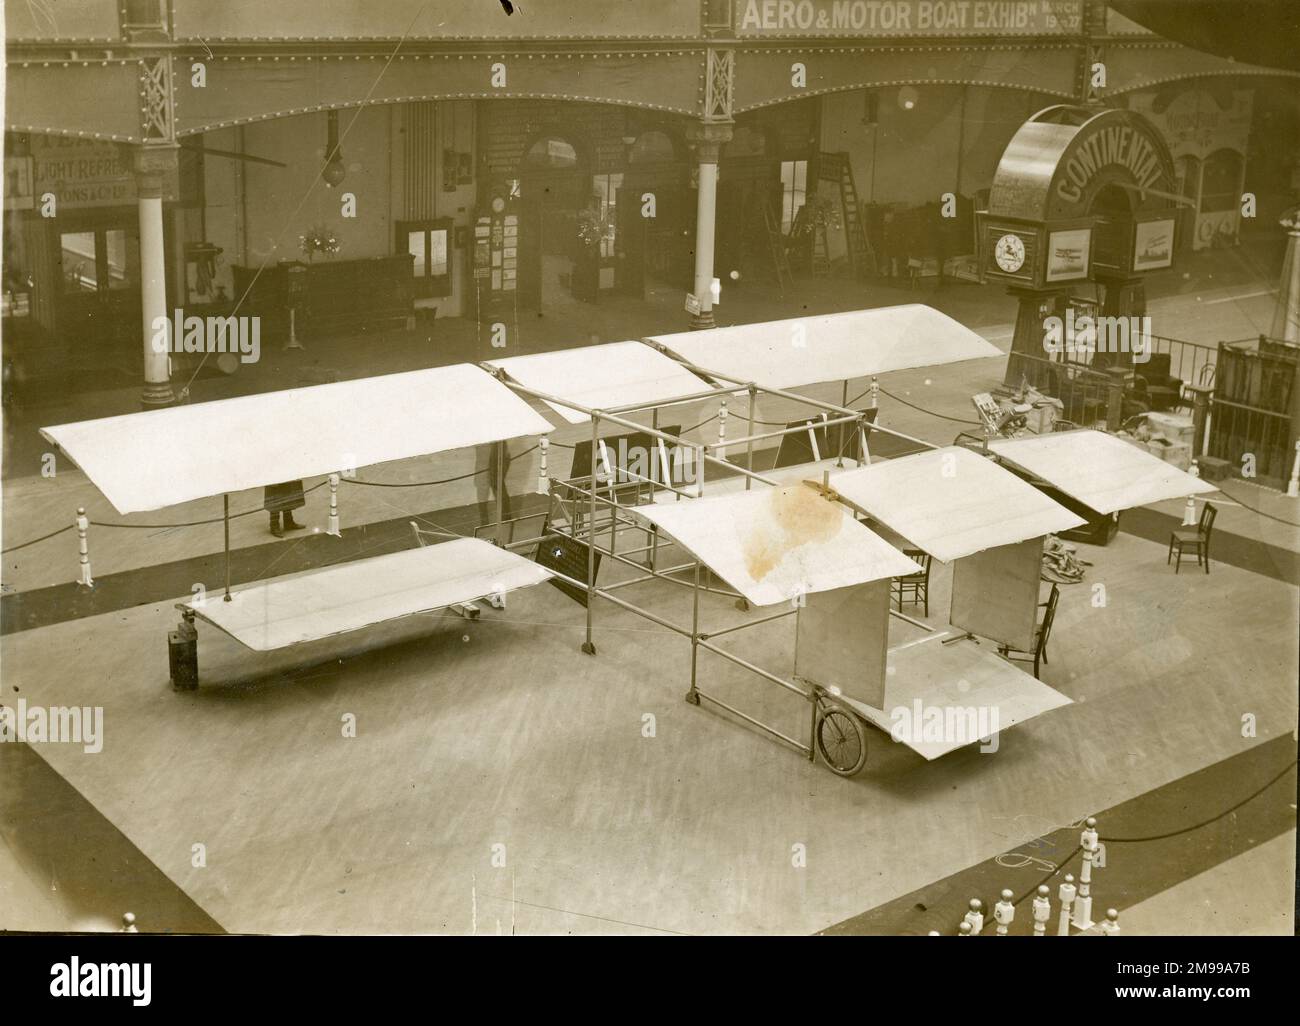 Breguet I Biplane at the Olympia Aero and Motor Boat Exhibition, 11-19 March 1910. Stock Photo